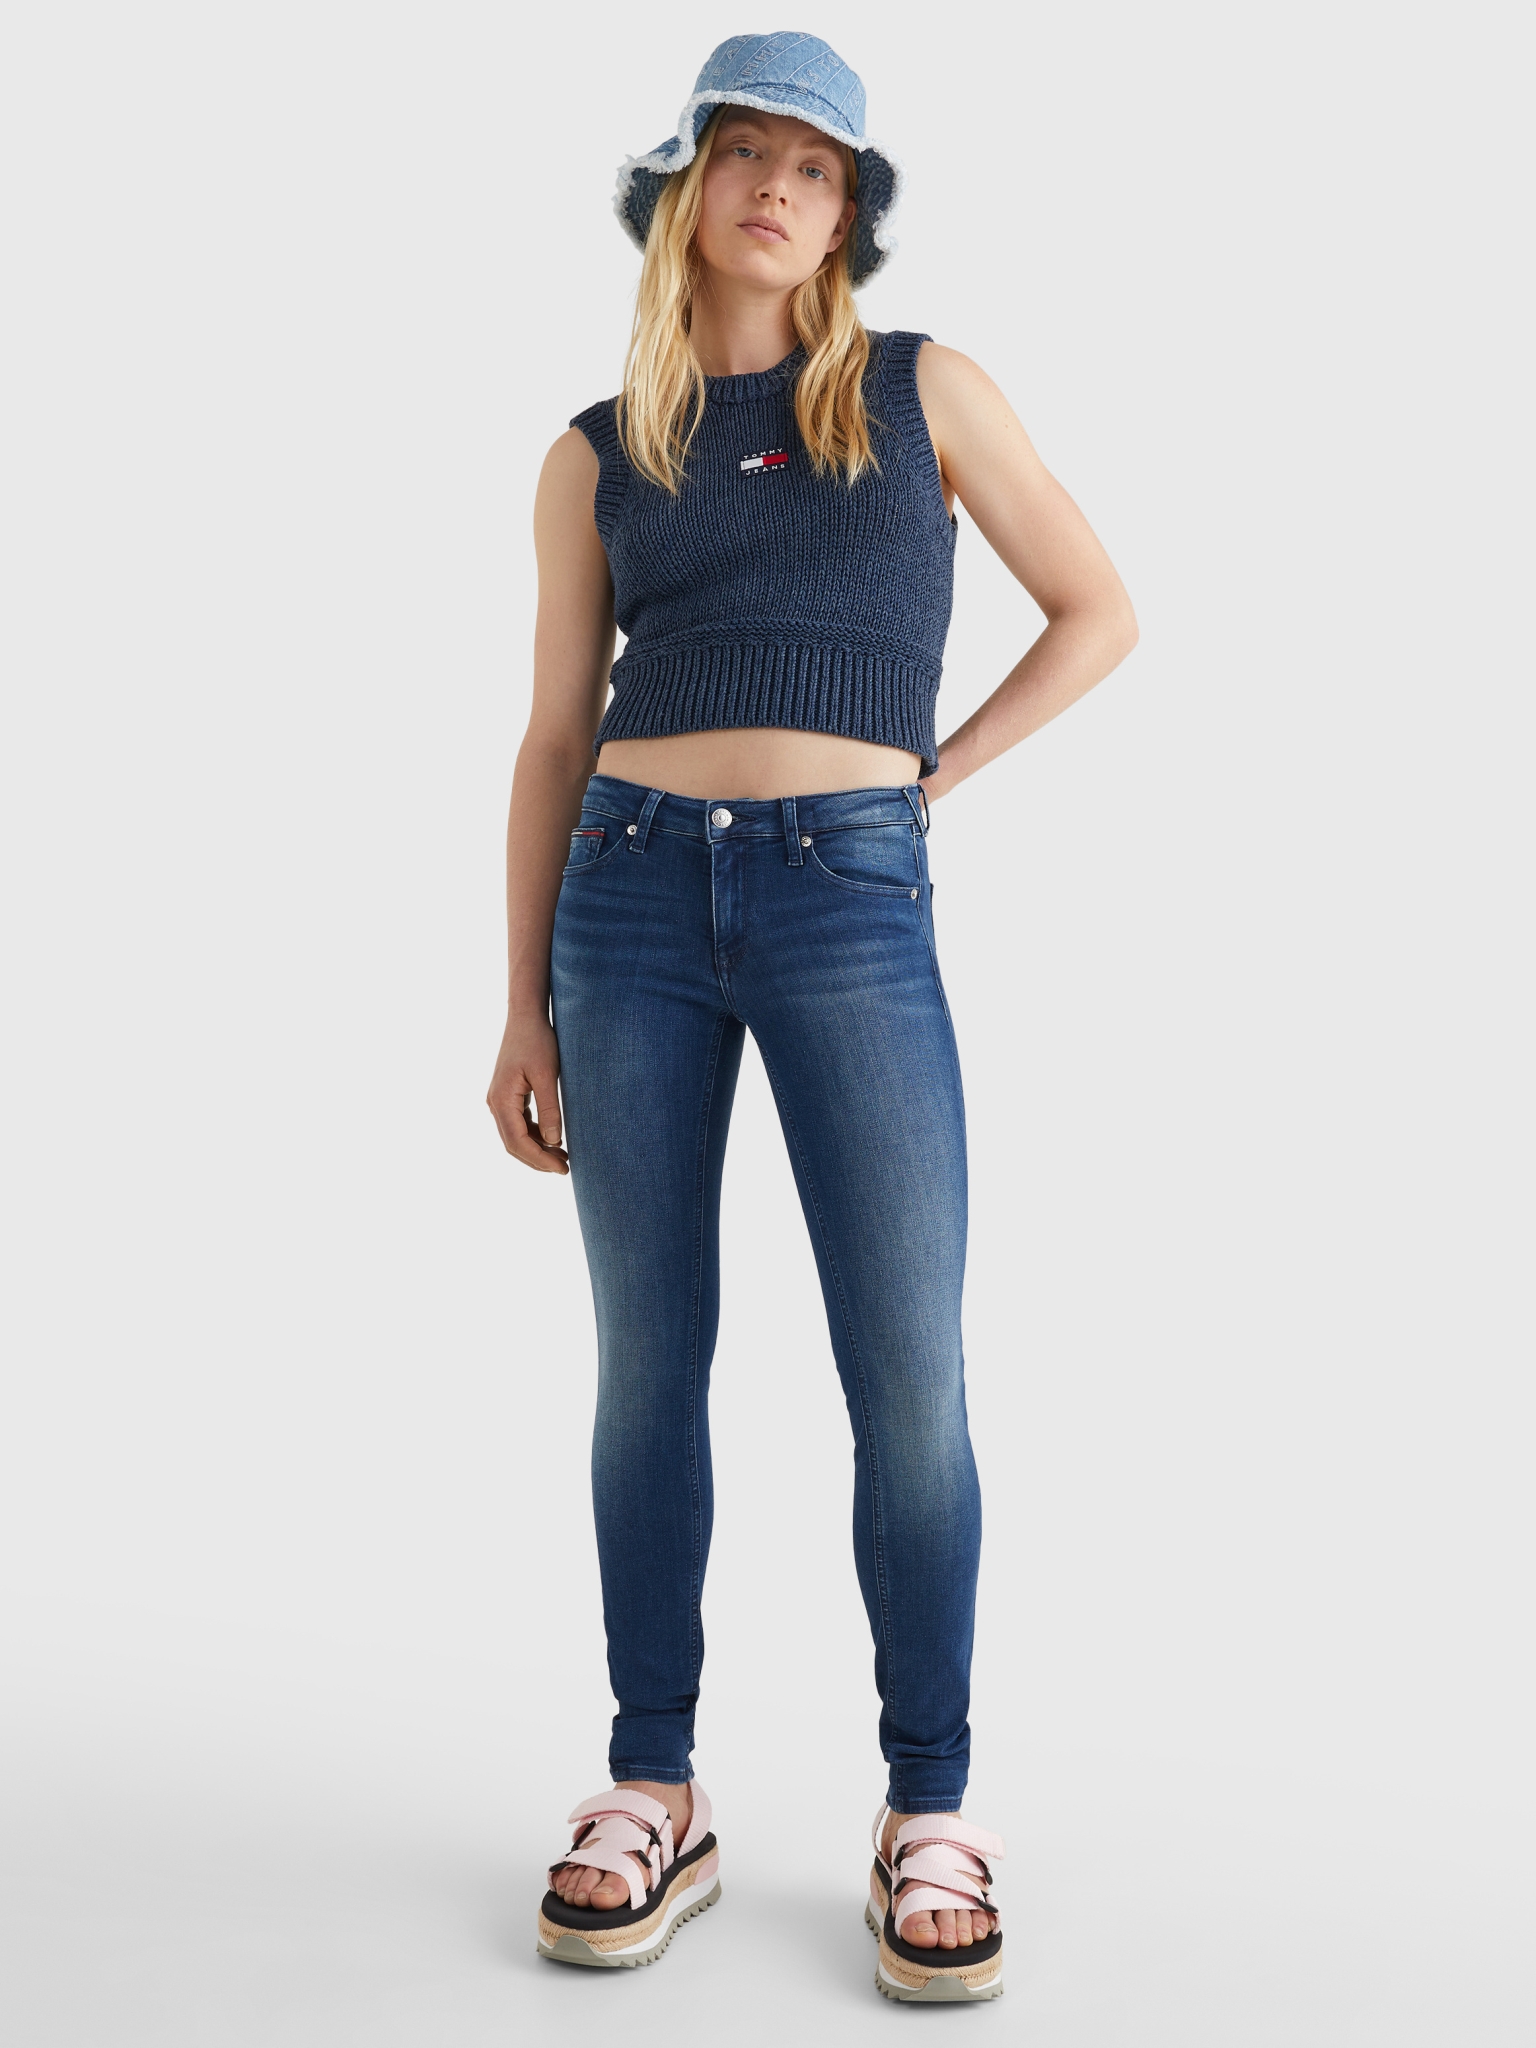 TOMMY JEANS Jeans SOPHIE SKINNY FIT 10614735